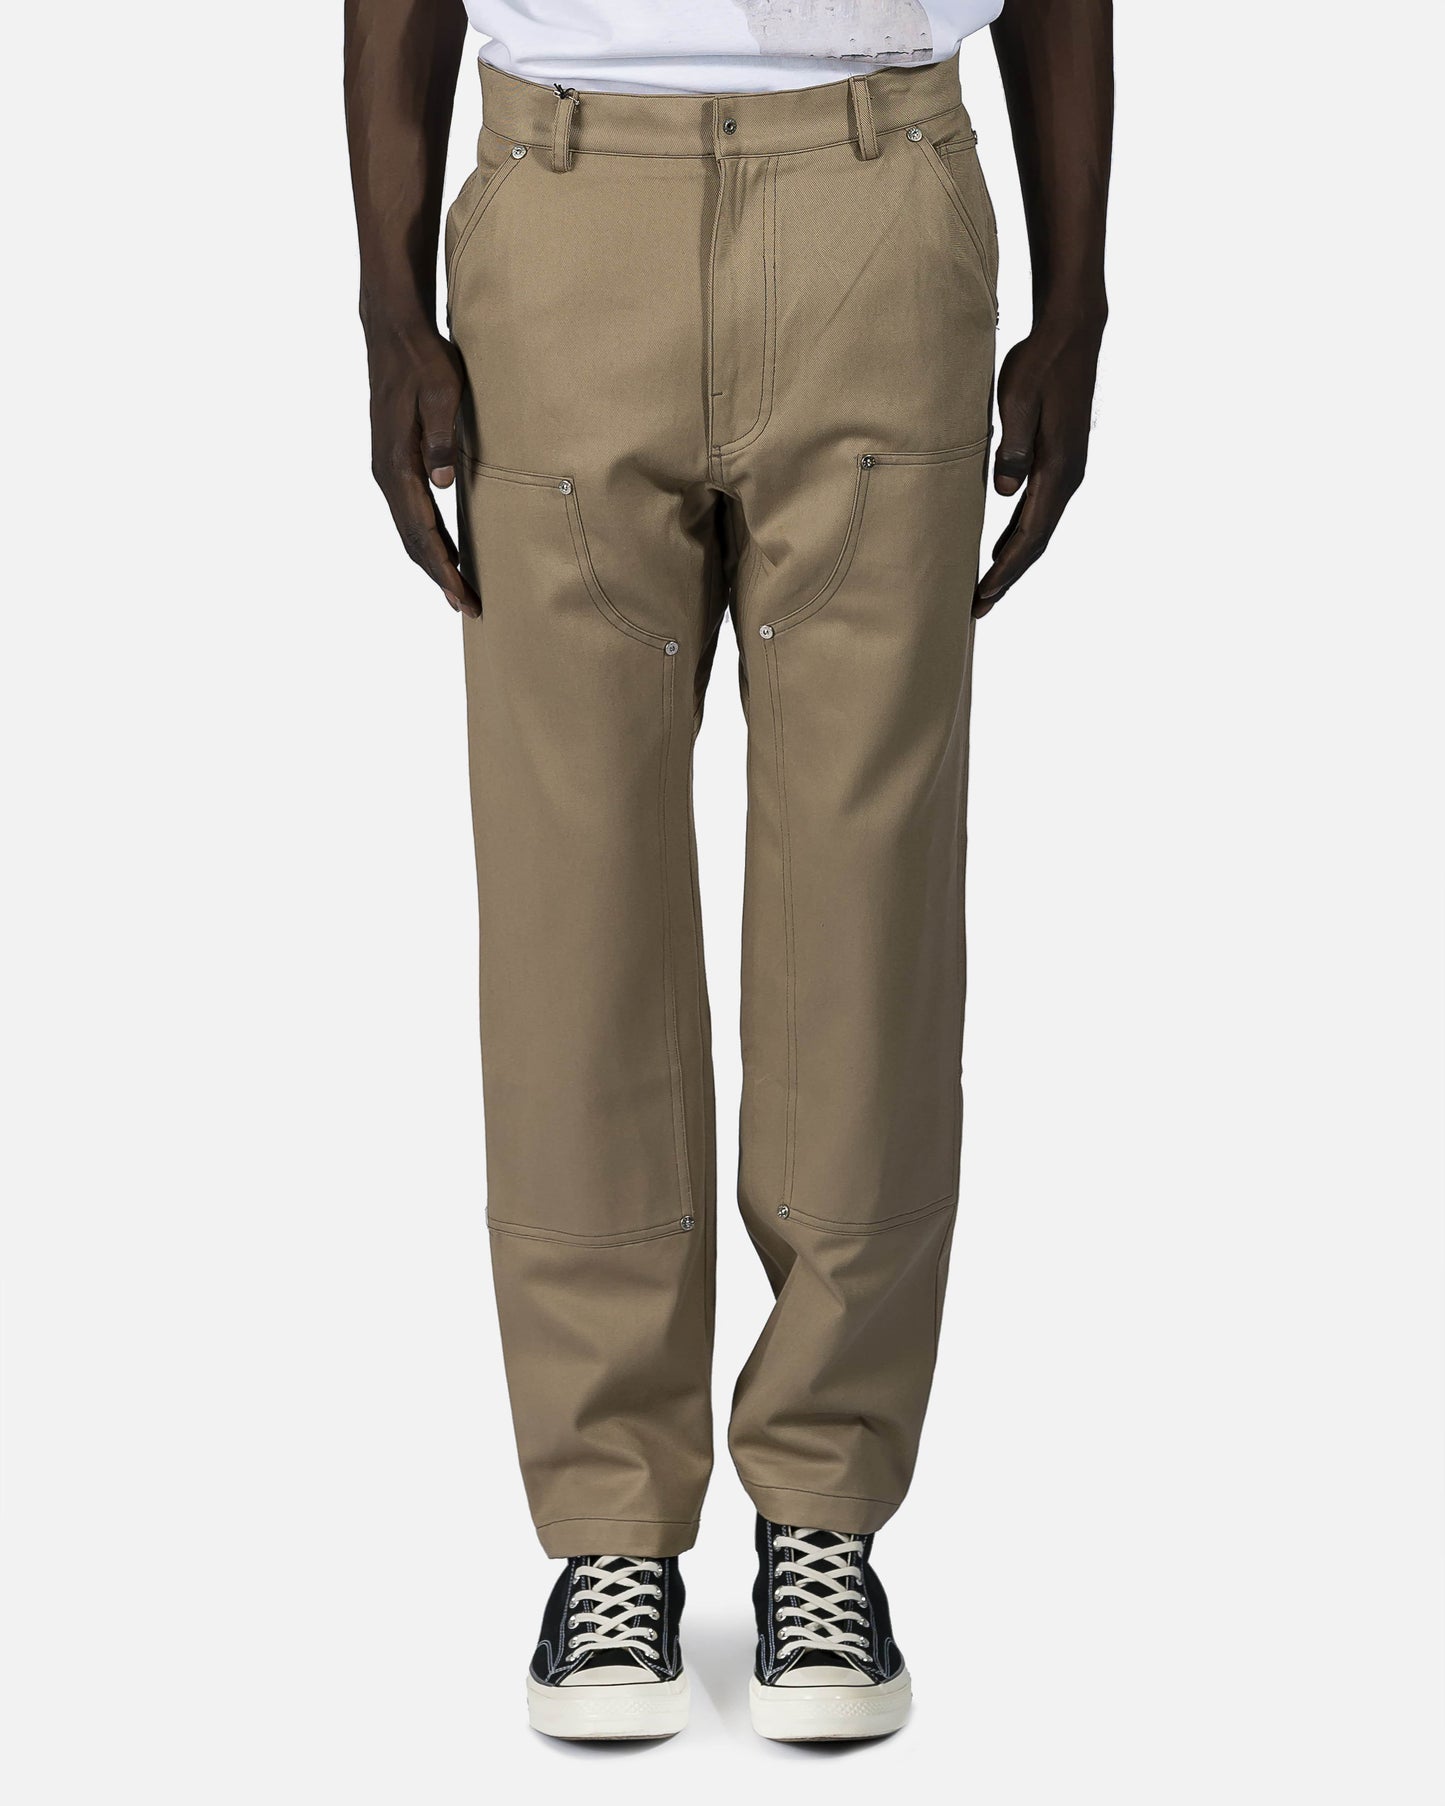 IISE Men's Pants Double Front Pant in Sand